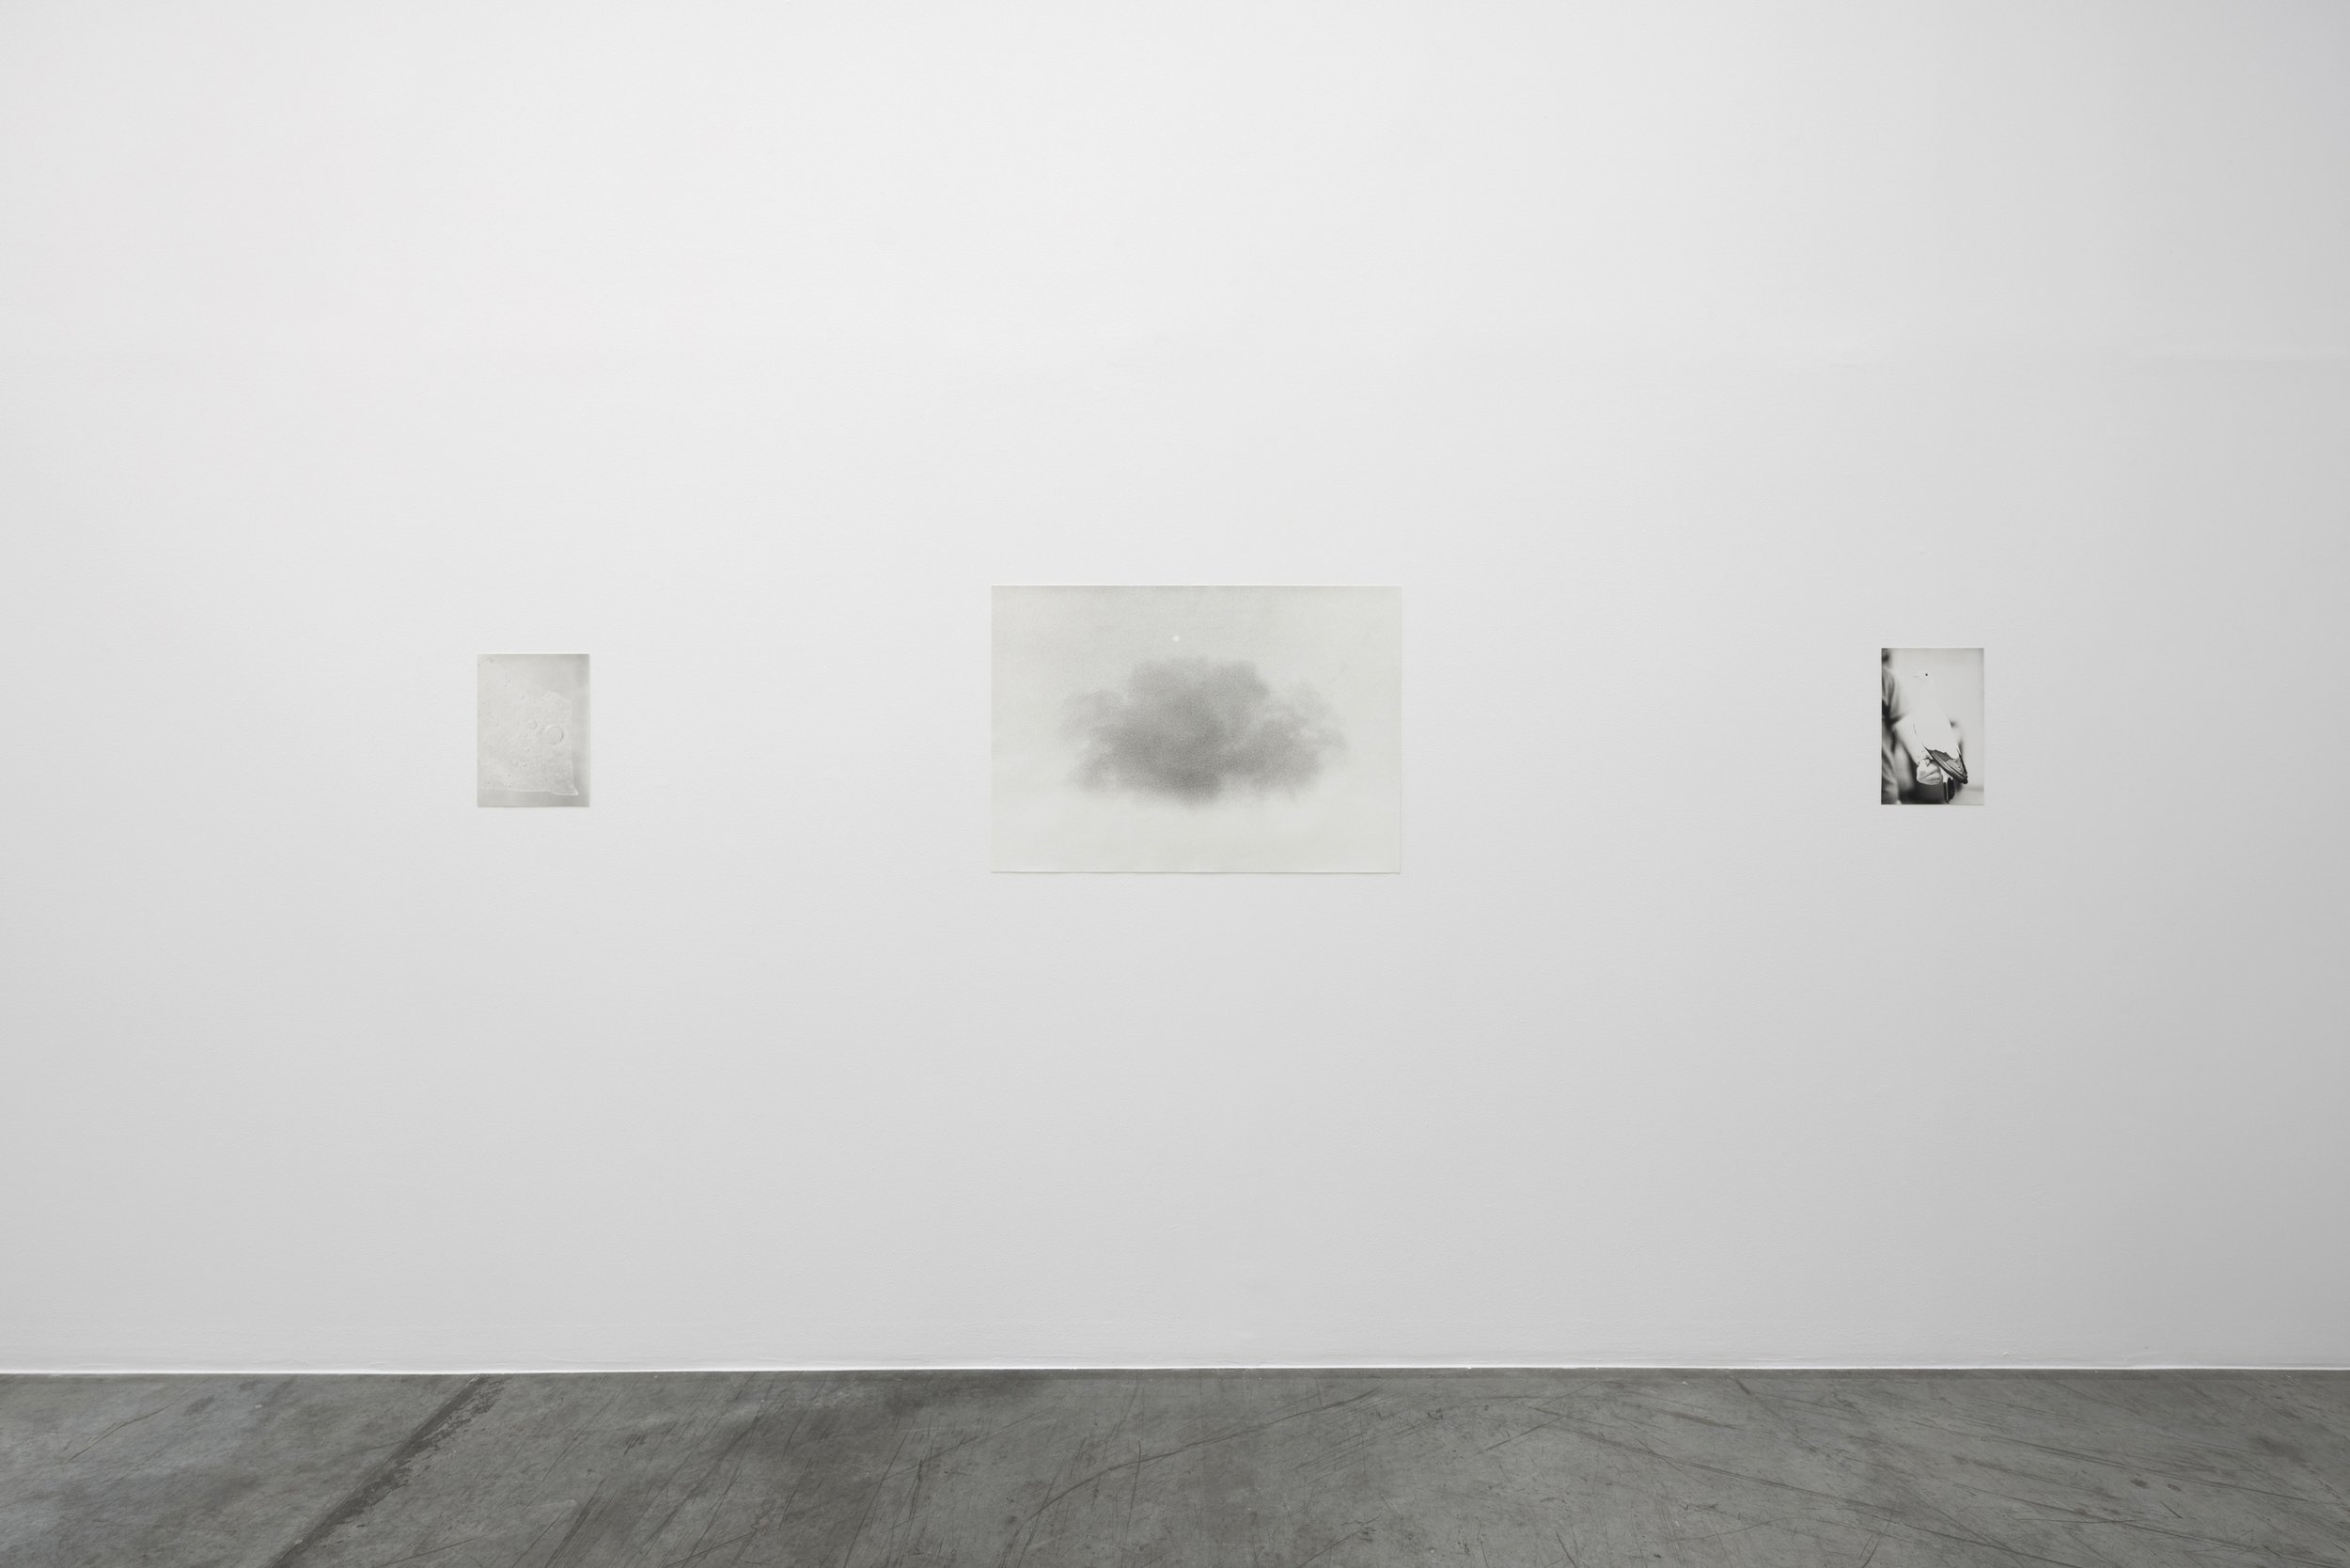  Installation view / Natural Sources R-L  Fruit Dove, 2022, silver gelatin print, 37 x 24.5 cm, edition 2/5 / Cloud and Moon, 2020, silver gelatin print, 67.5 x 96.5 cm, edition 1/5 / Eisscheibe, 2022, silver gelatin print, 36 x 26 cm, edition 2/5   